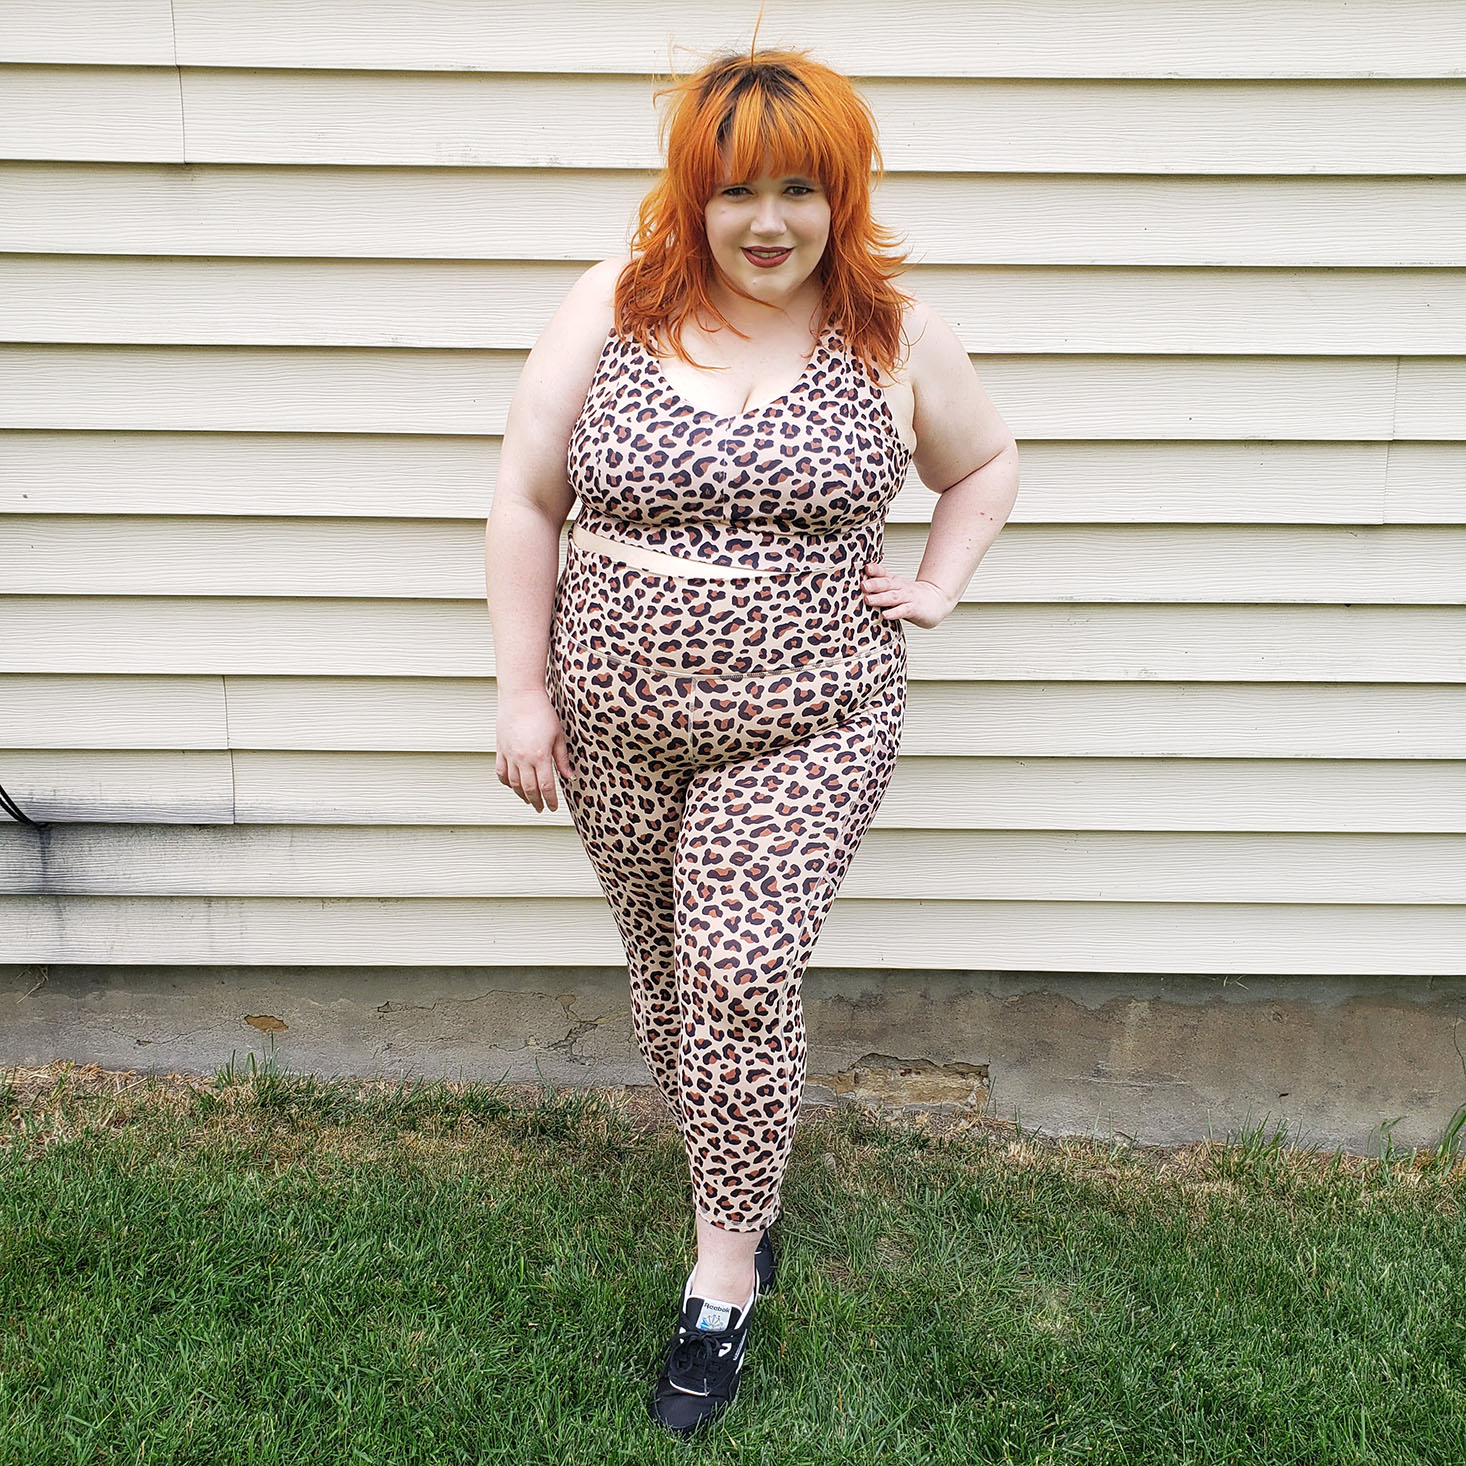 Fabletics VIP Plus Size Review + Coupon - May 2020